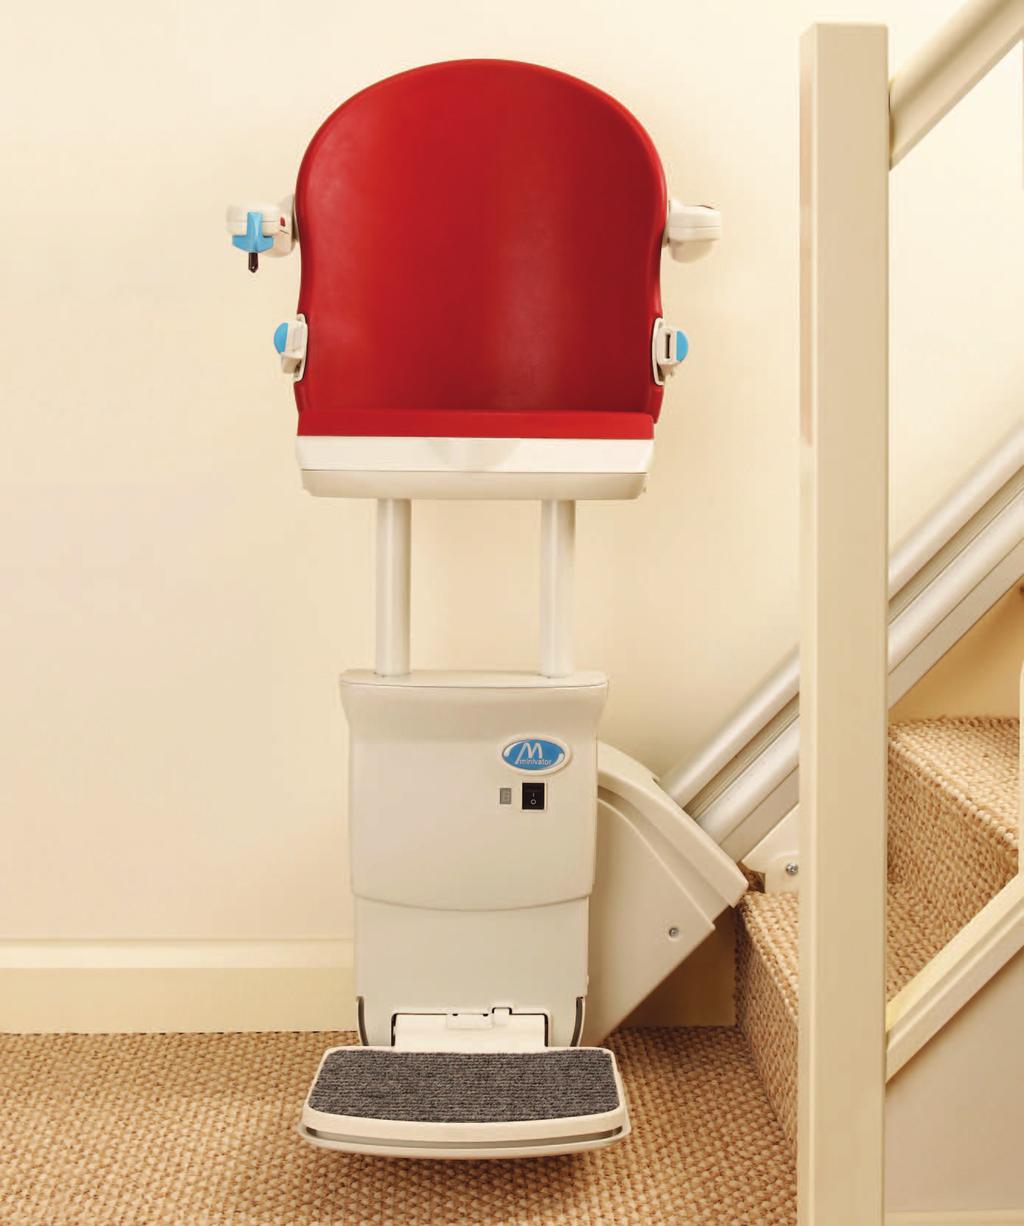 Perch Seats Straight and Curved Stairlifts If you have restricted movement in the knee or hip joints you may find sitting painful. In these situations a perch seat may be the solution.